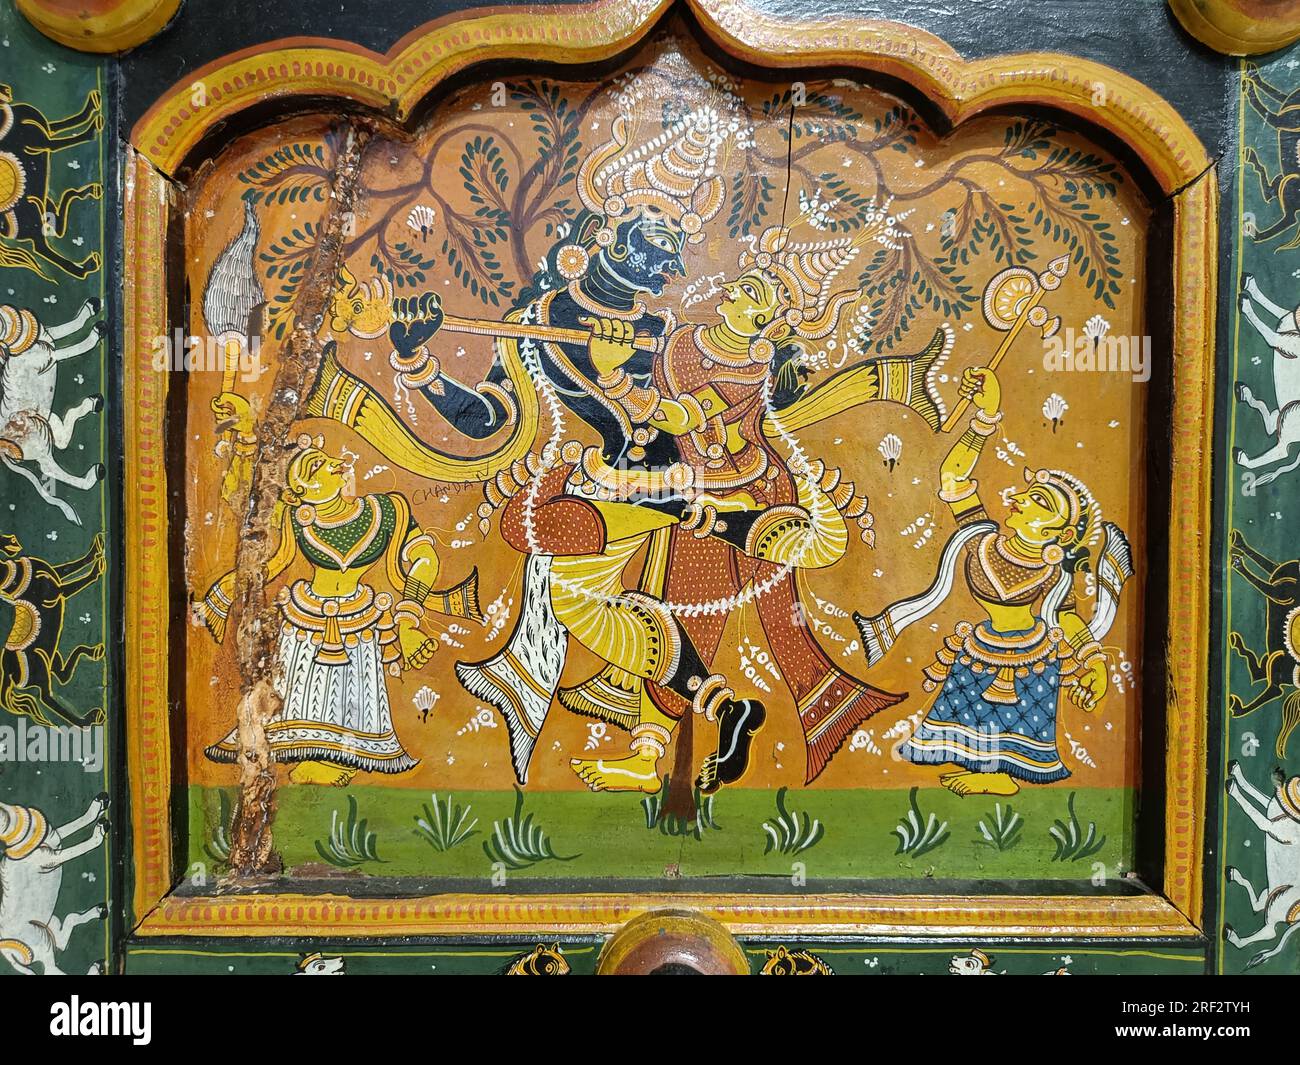 Radha Krishna engaged in public display of affection. Get a room you two. Popular stories of Krishna's life painted on a door. Bhittichitra form. Stock Photo